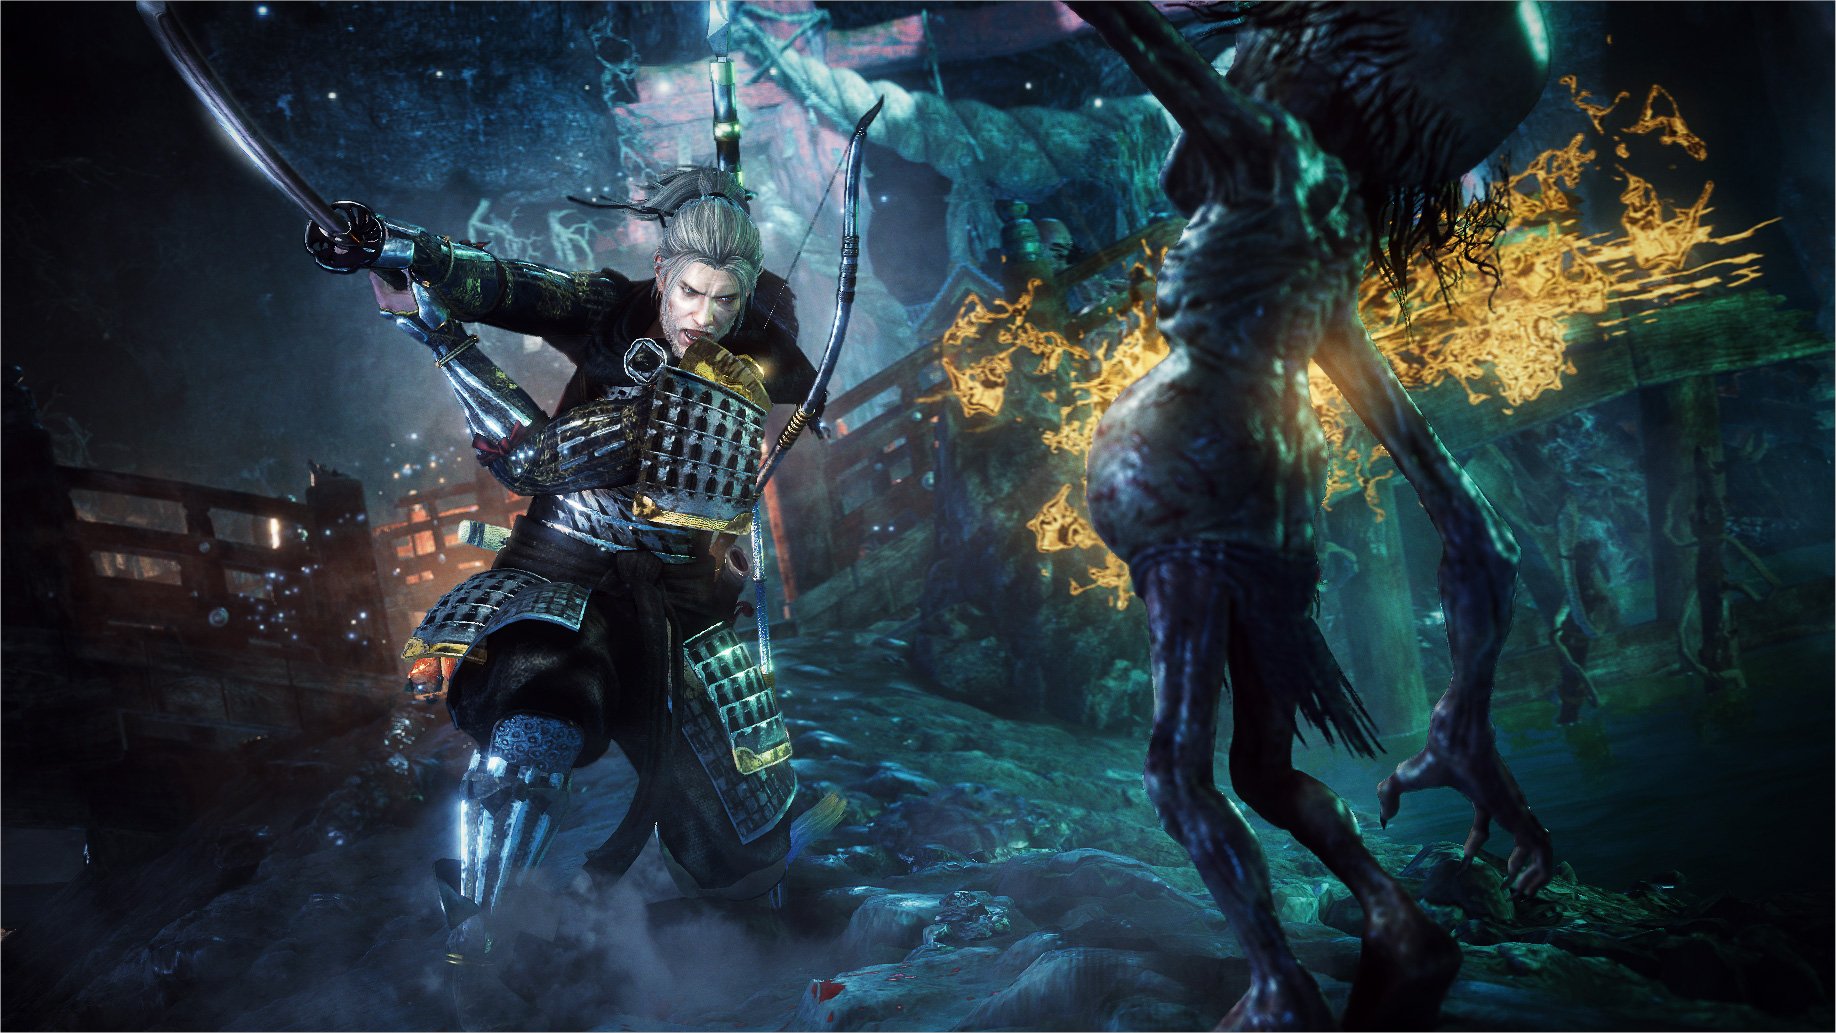 Nioh 2 Launches March 13, 2020 – Open Beta Includes Playable Nioh 1 Protagonist William